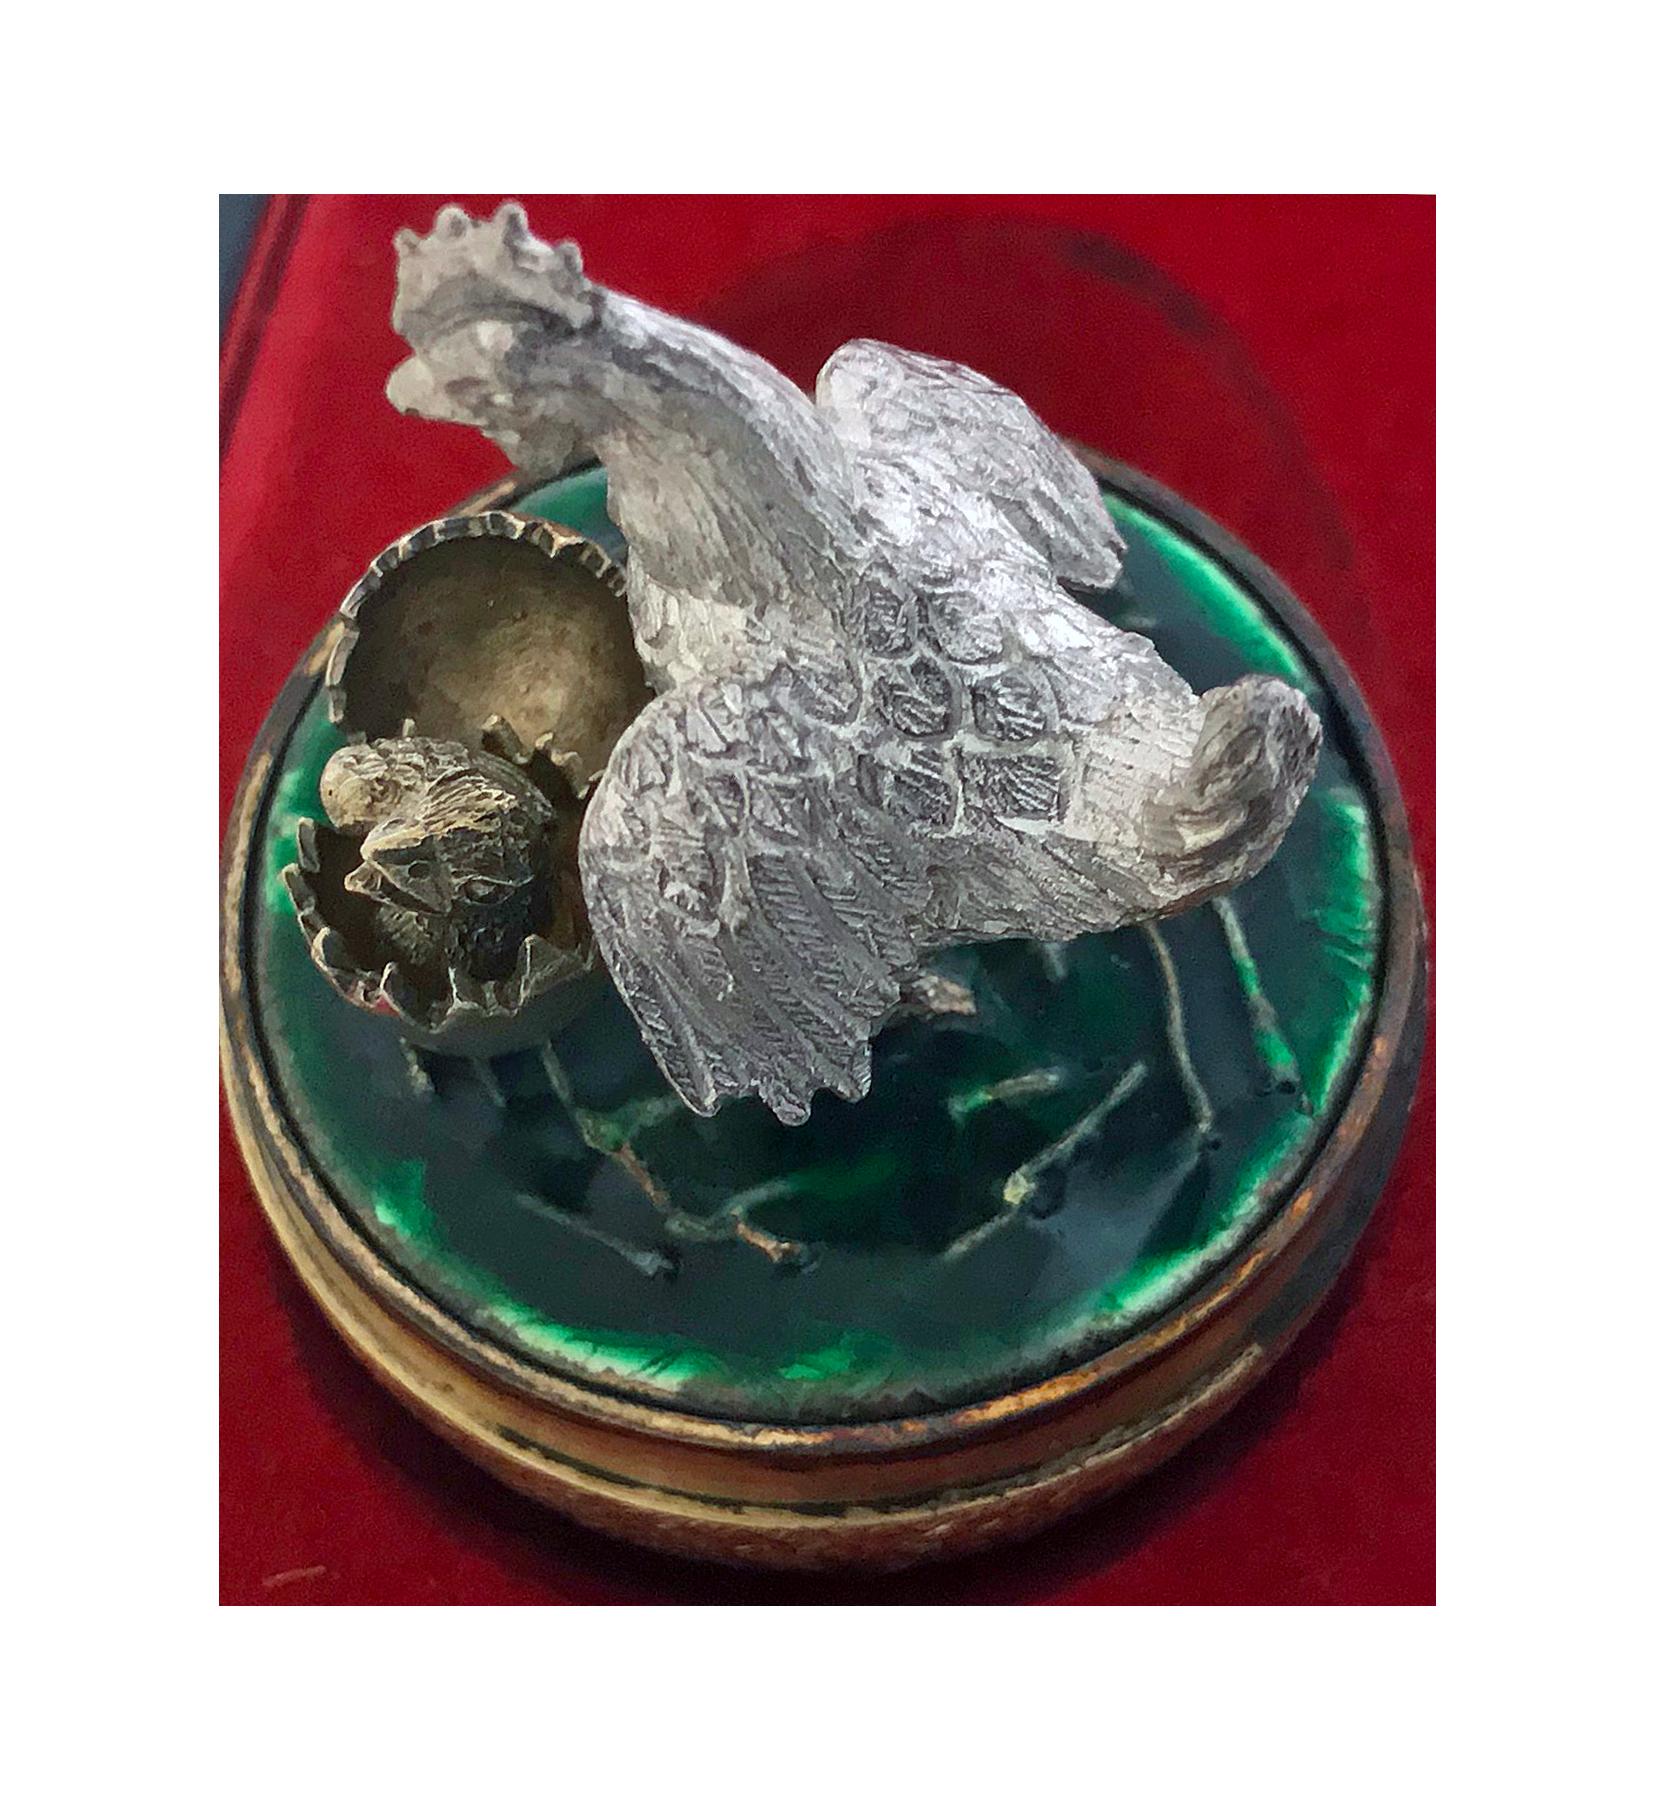 Stuart Devlin Silver Gilt Surprise Chicken Egg, London 1981, opening to reveal a Chicken standing over a baby chick hatching. Original box. Height: 7.5cm high, No 19 of limited edition. Item Weight: 138 grams.